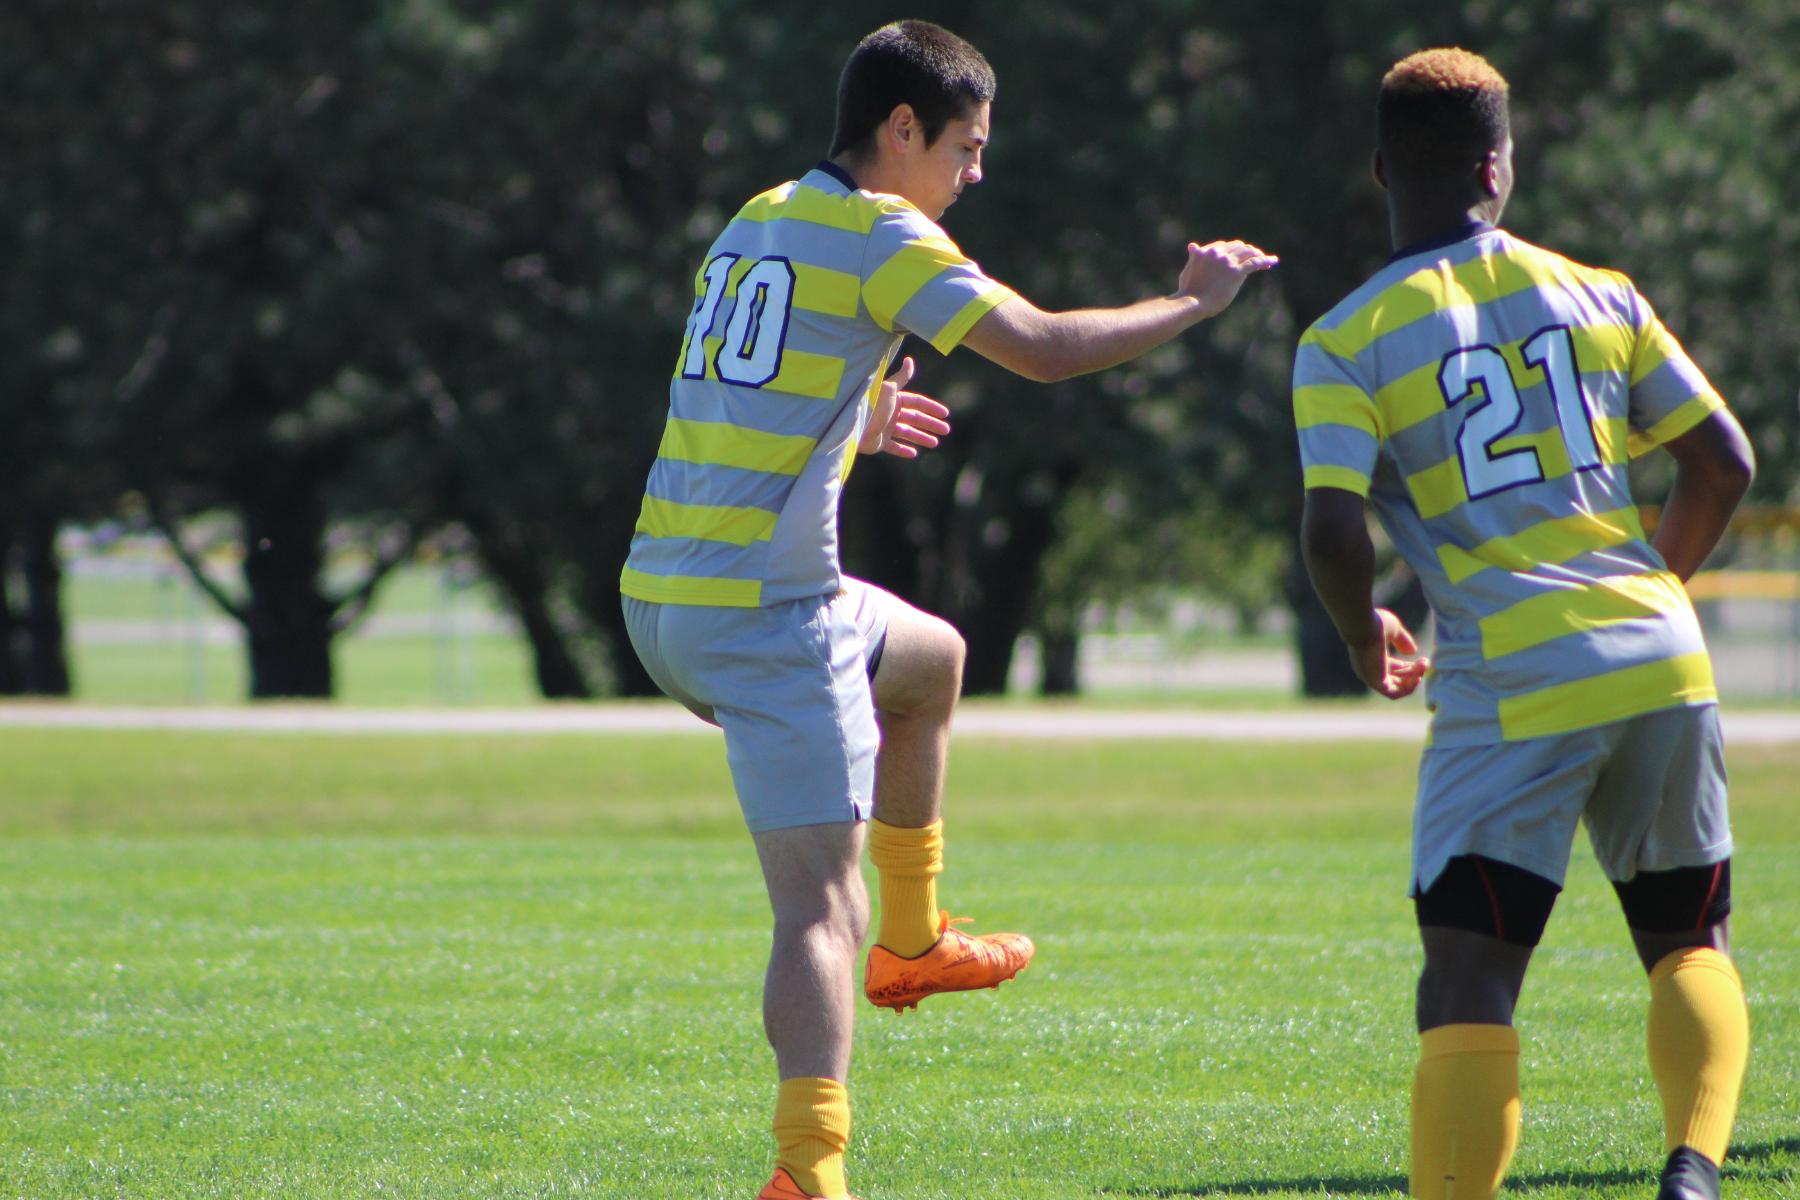 Two goals from Thiago Fernandes carries No. 9 MCC